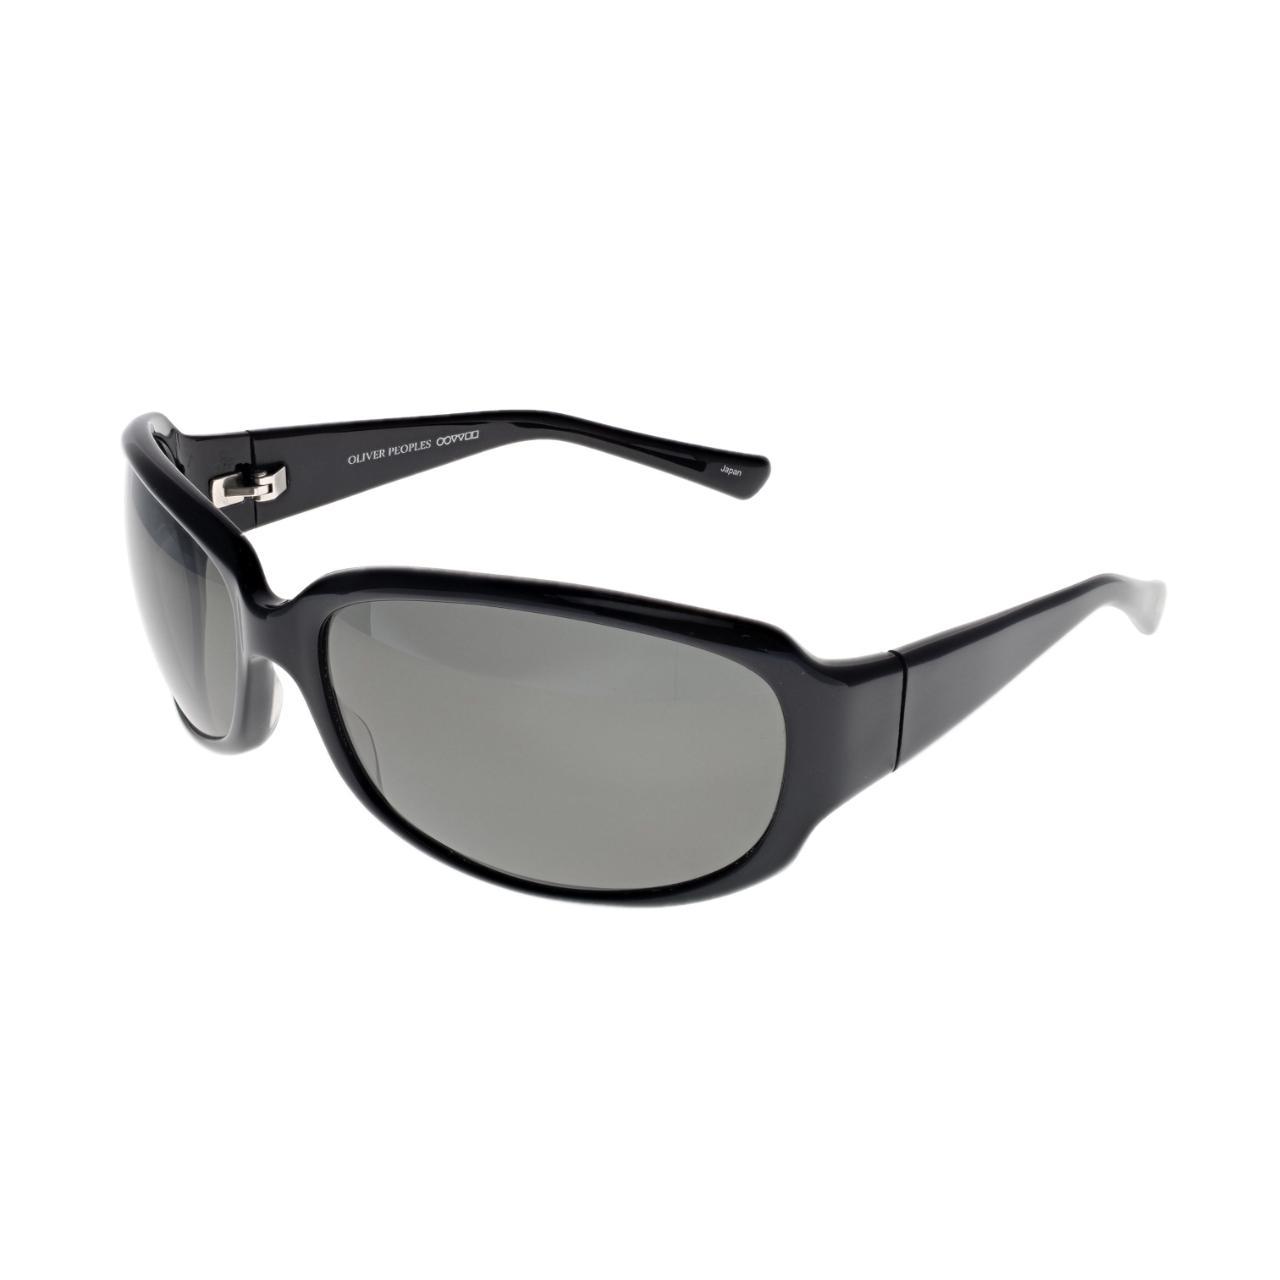 Oliver Peoples Women's Black and Grey Sunglasses